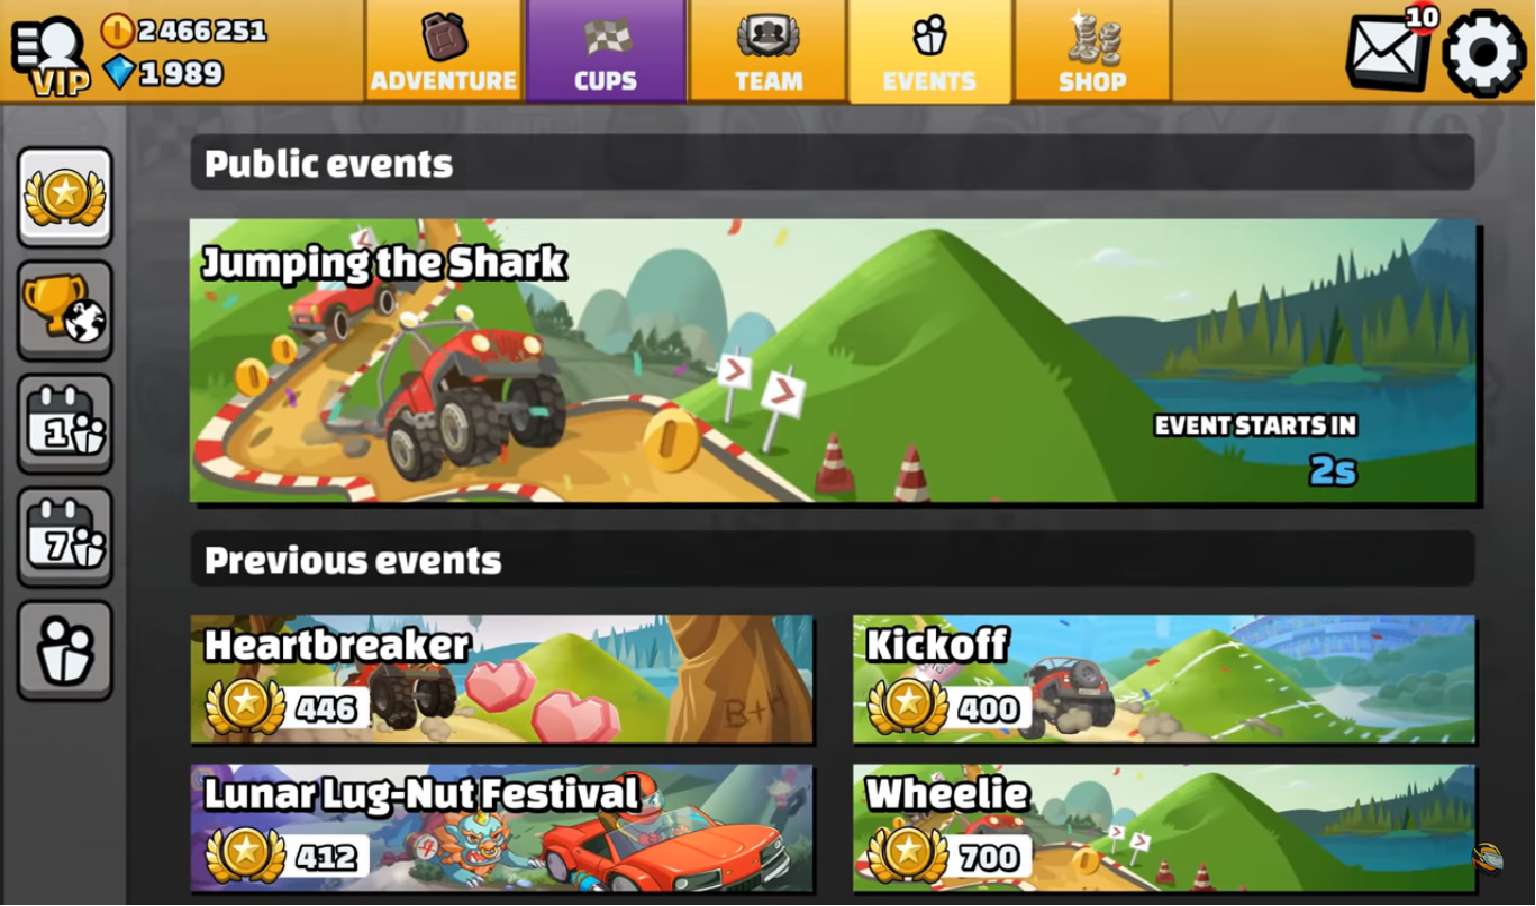 Hill Climb Racing 2 Brings Jumping The Shark Event For Their Weekly Event